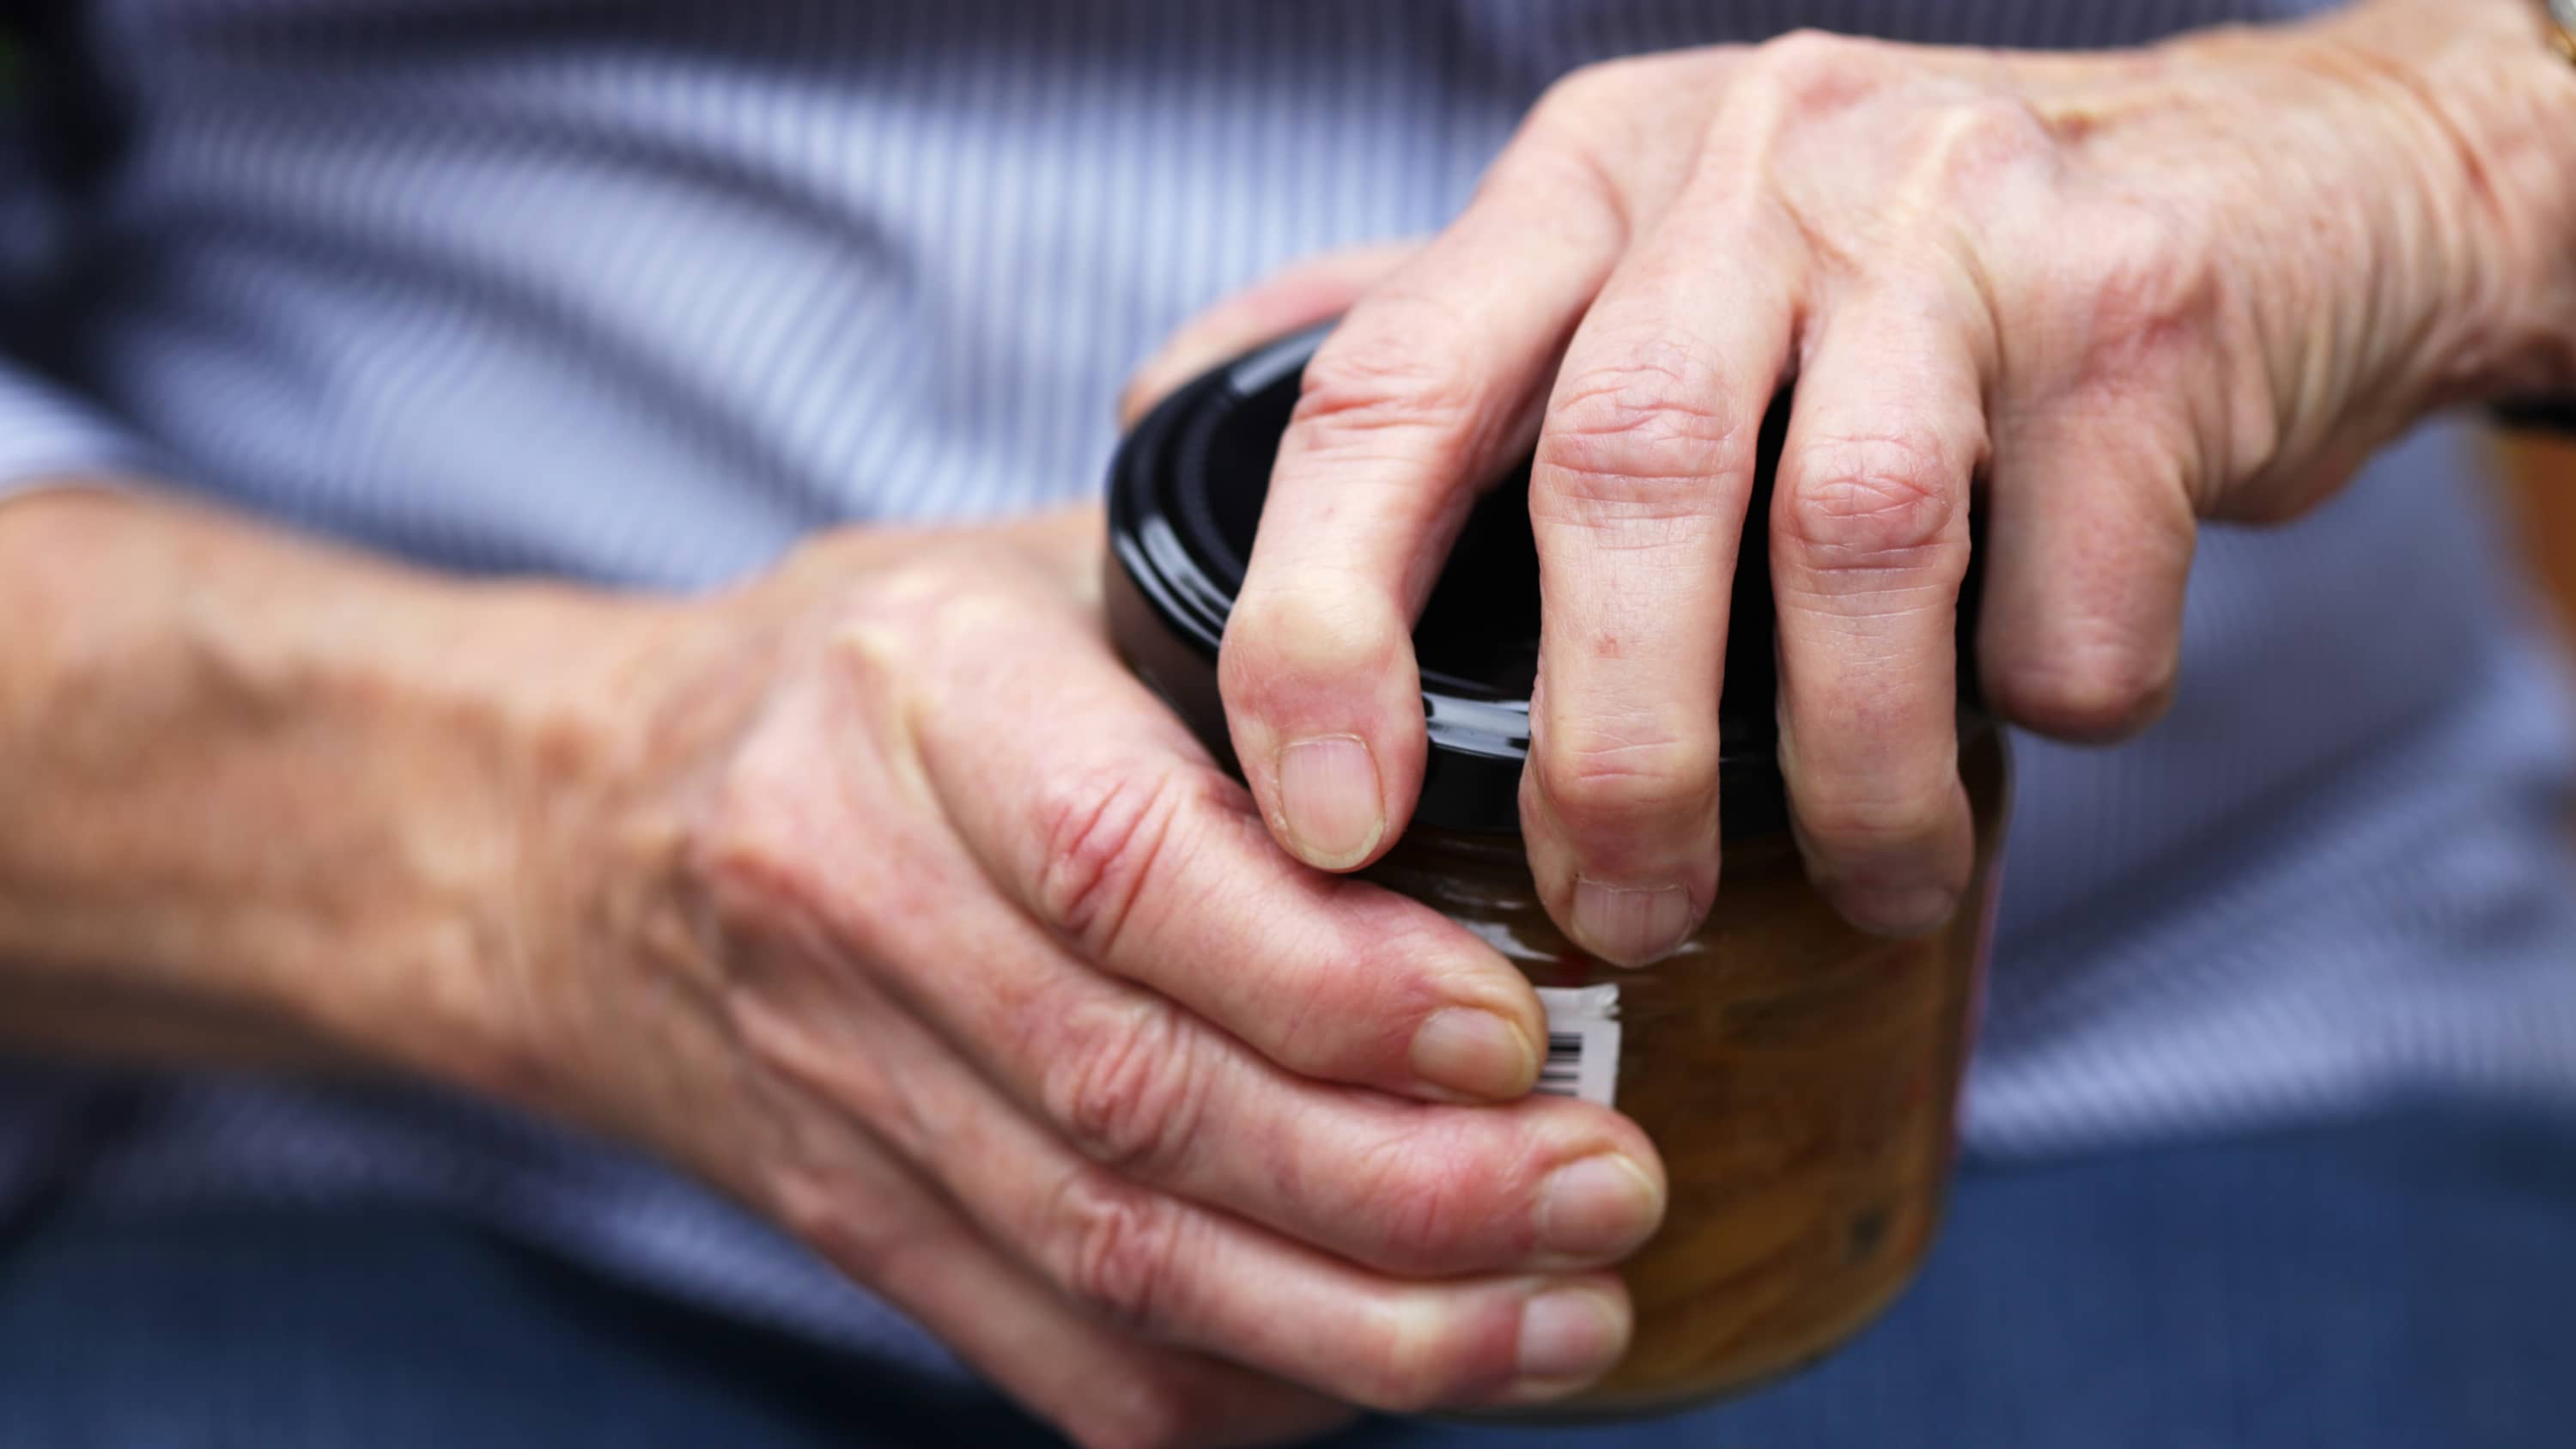 Older person with arthritis having difficulty opening a jar